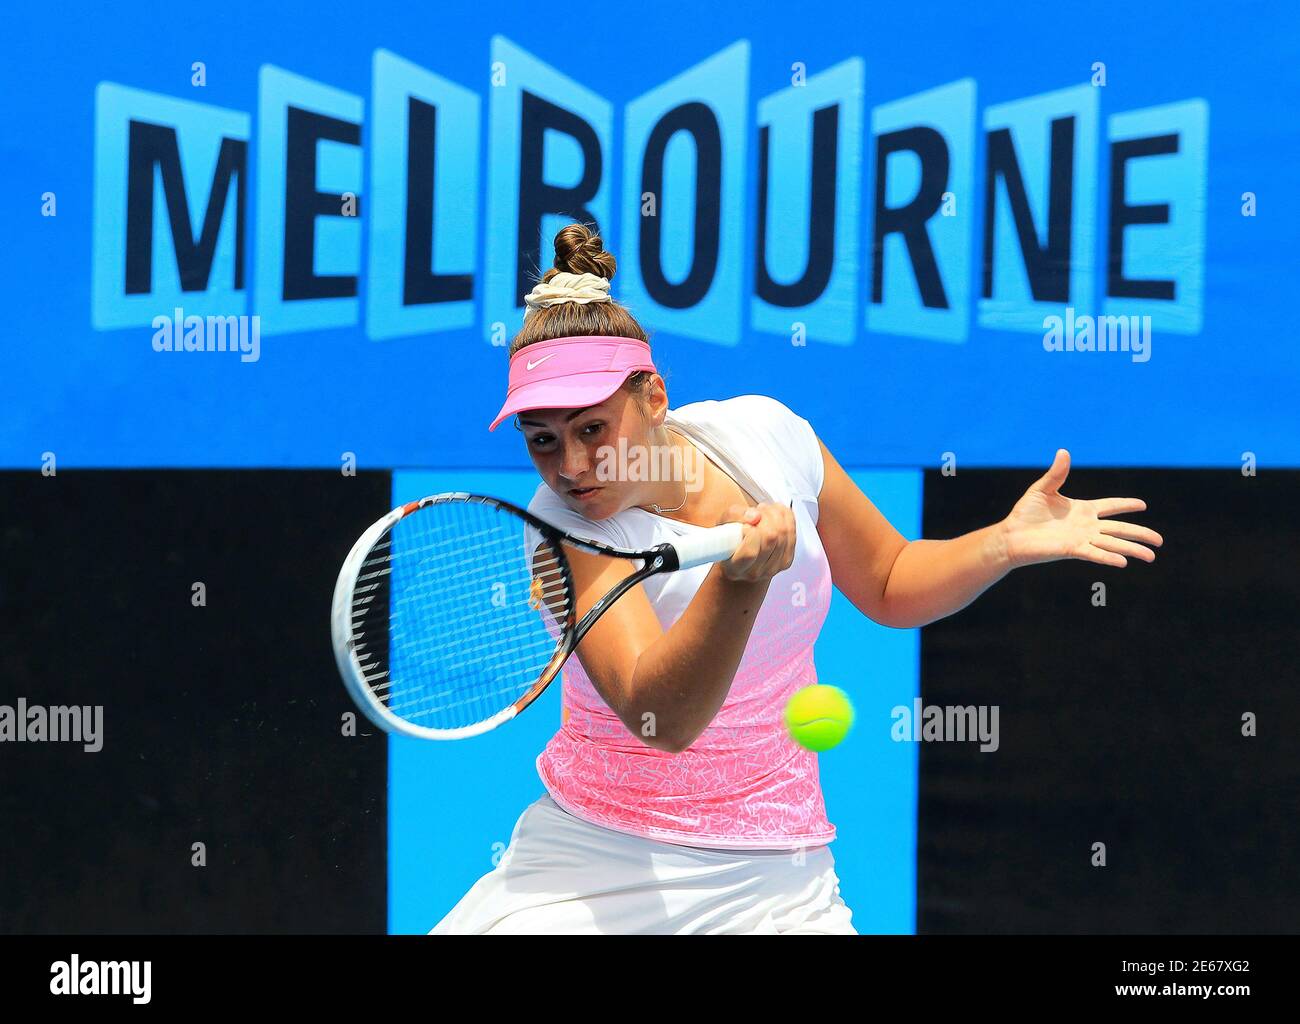 Sara Tomic of Australia hits a return to Tami Grende of Indonesia during their junior girls' singles first round match at the Australian Open tennis tournament in Melbourne January 25, 2015. Sara is the sister of Bernard Tomic, who will play Tomas Berdych of Czech Republic in their men's singles fourth round match later in the day. REUTERS/John French (AUSTRALIA  - Tags: SPORT TENNIS) Stock Photo